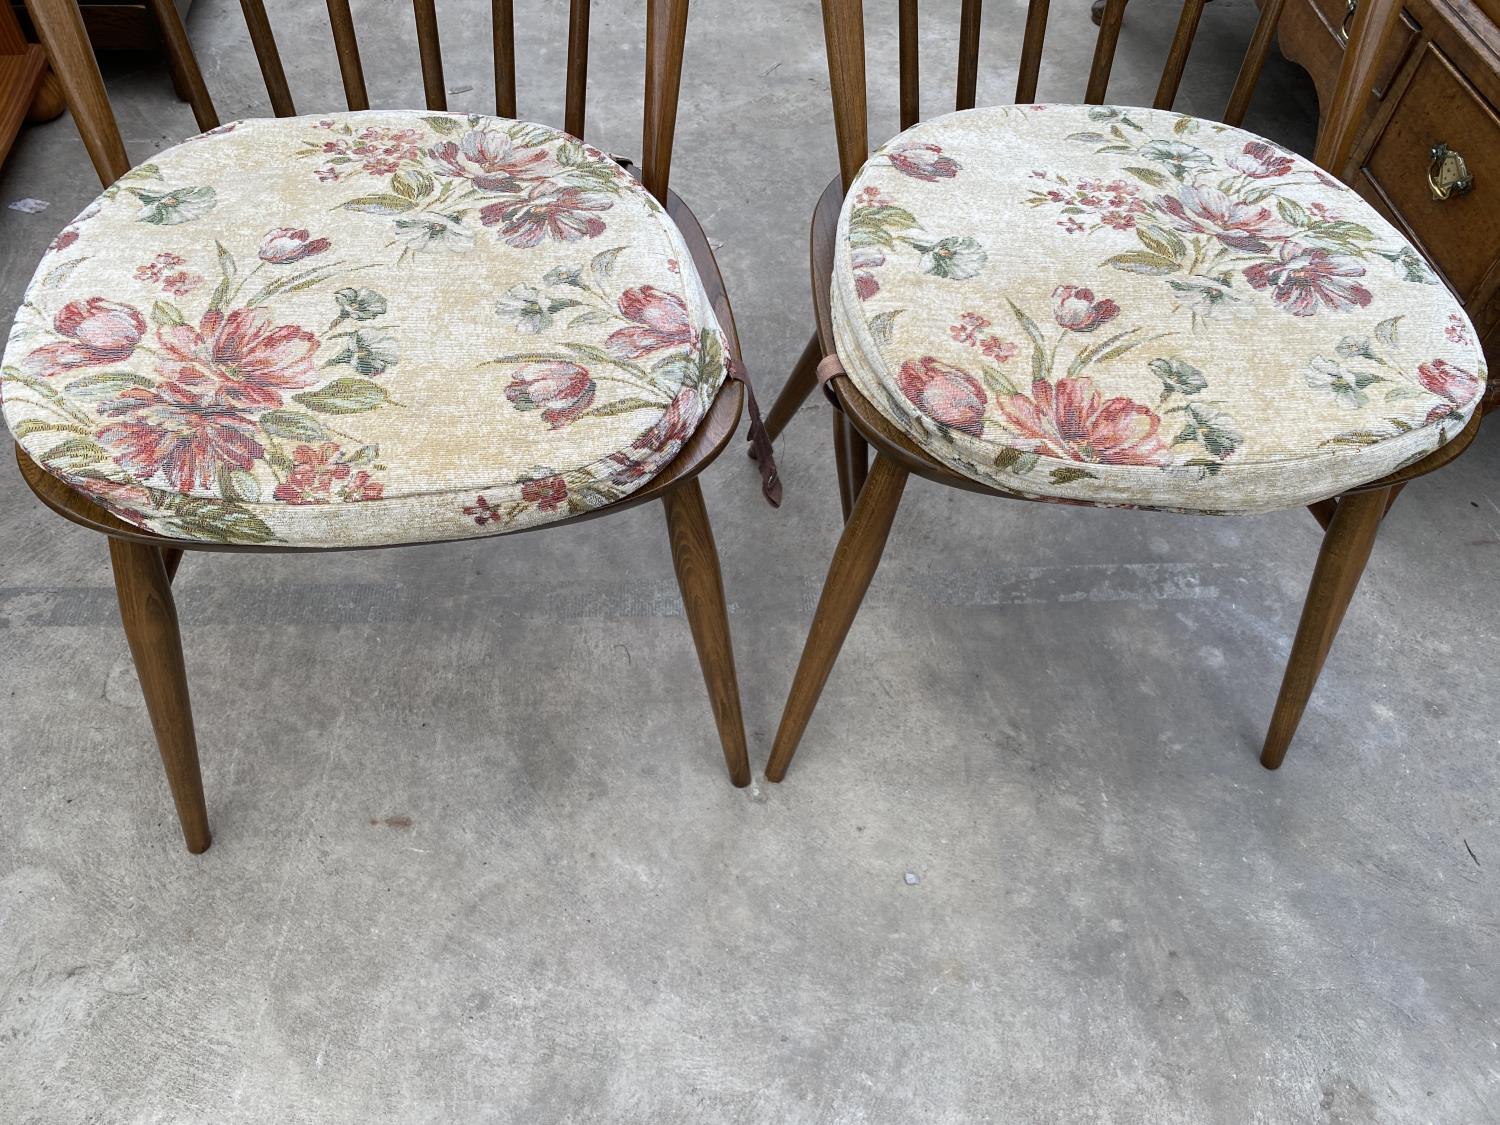 A PAIR OF ERCOL ELM AND BEECH WINDSOR STYLE DINING CHAIRS - Image 3 of 6